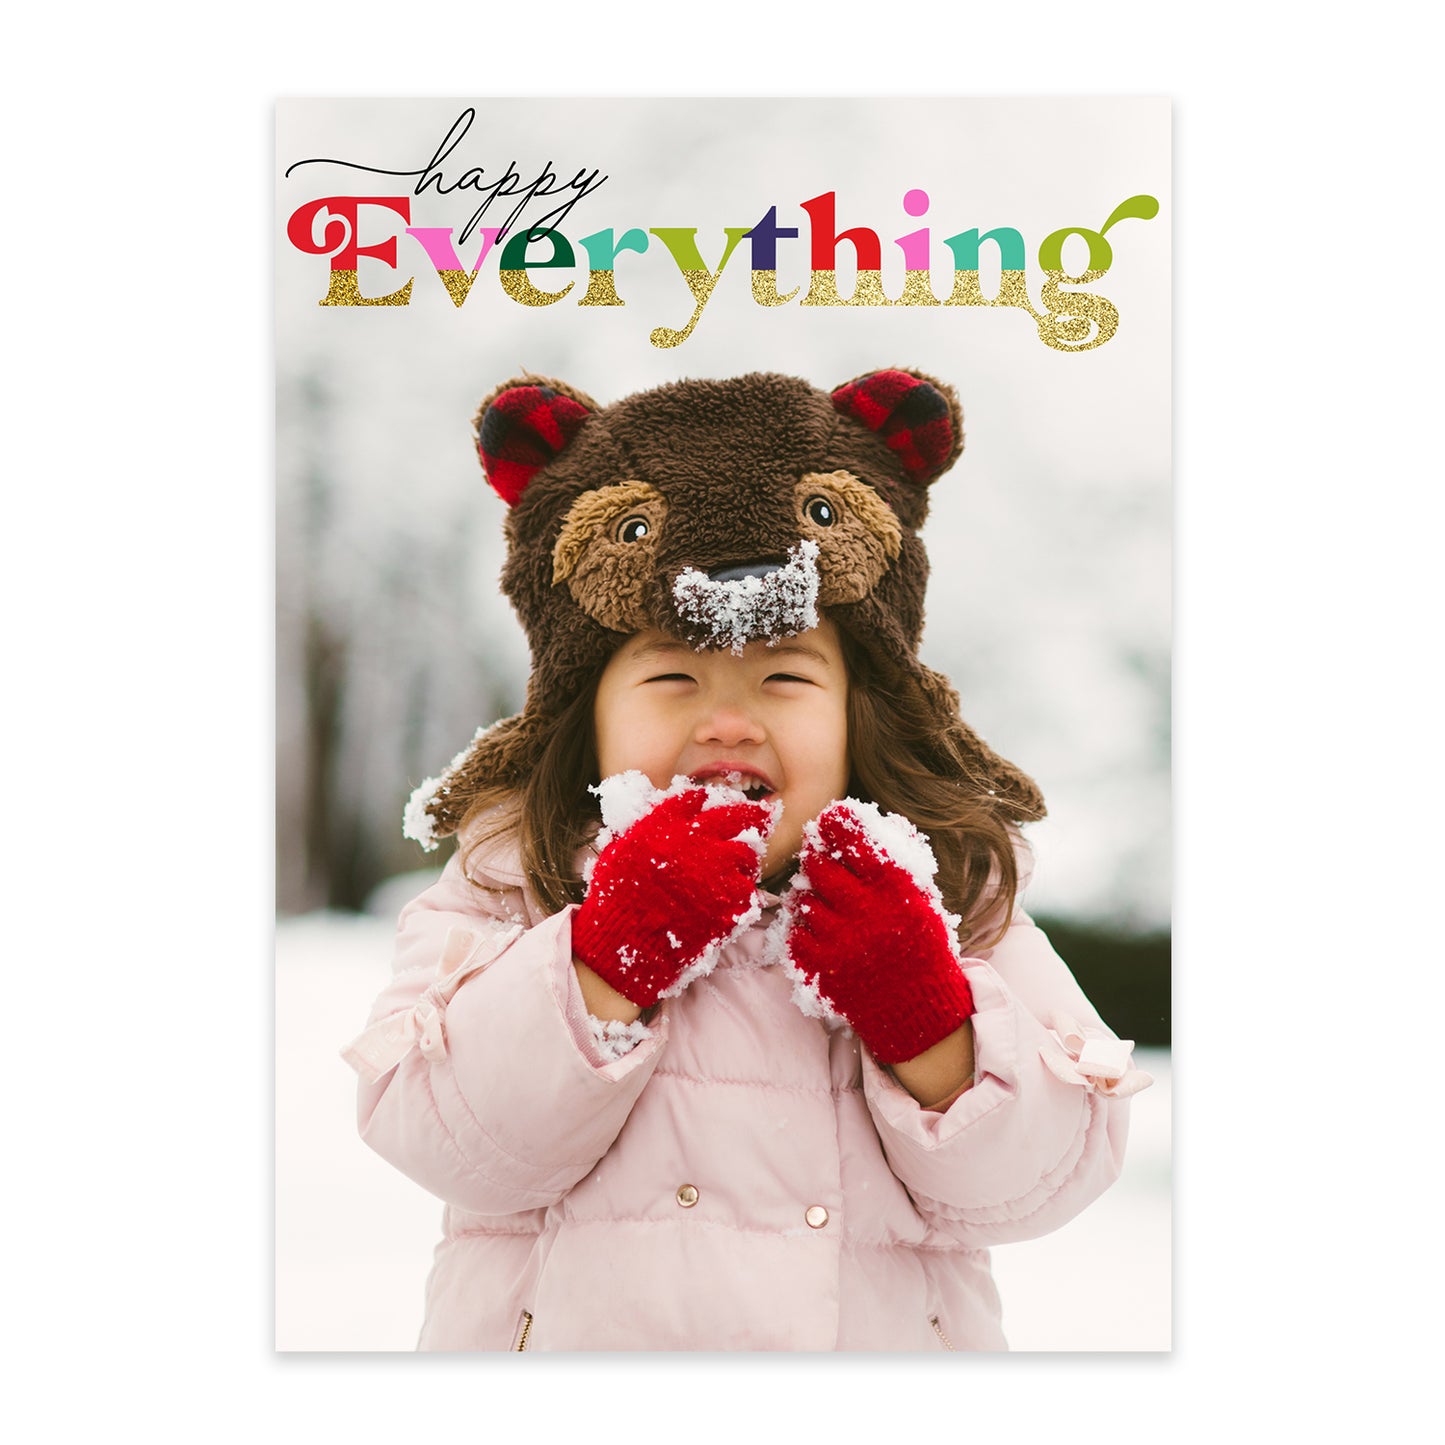 Happy Everything Christmas Card